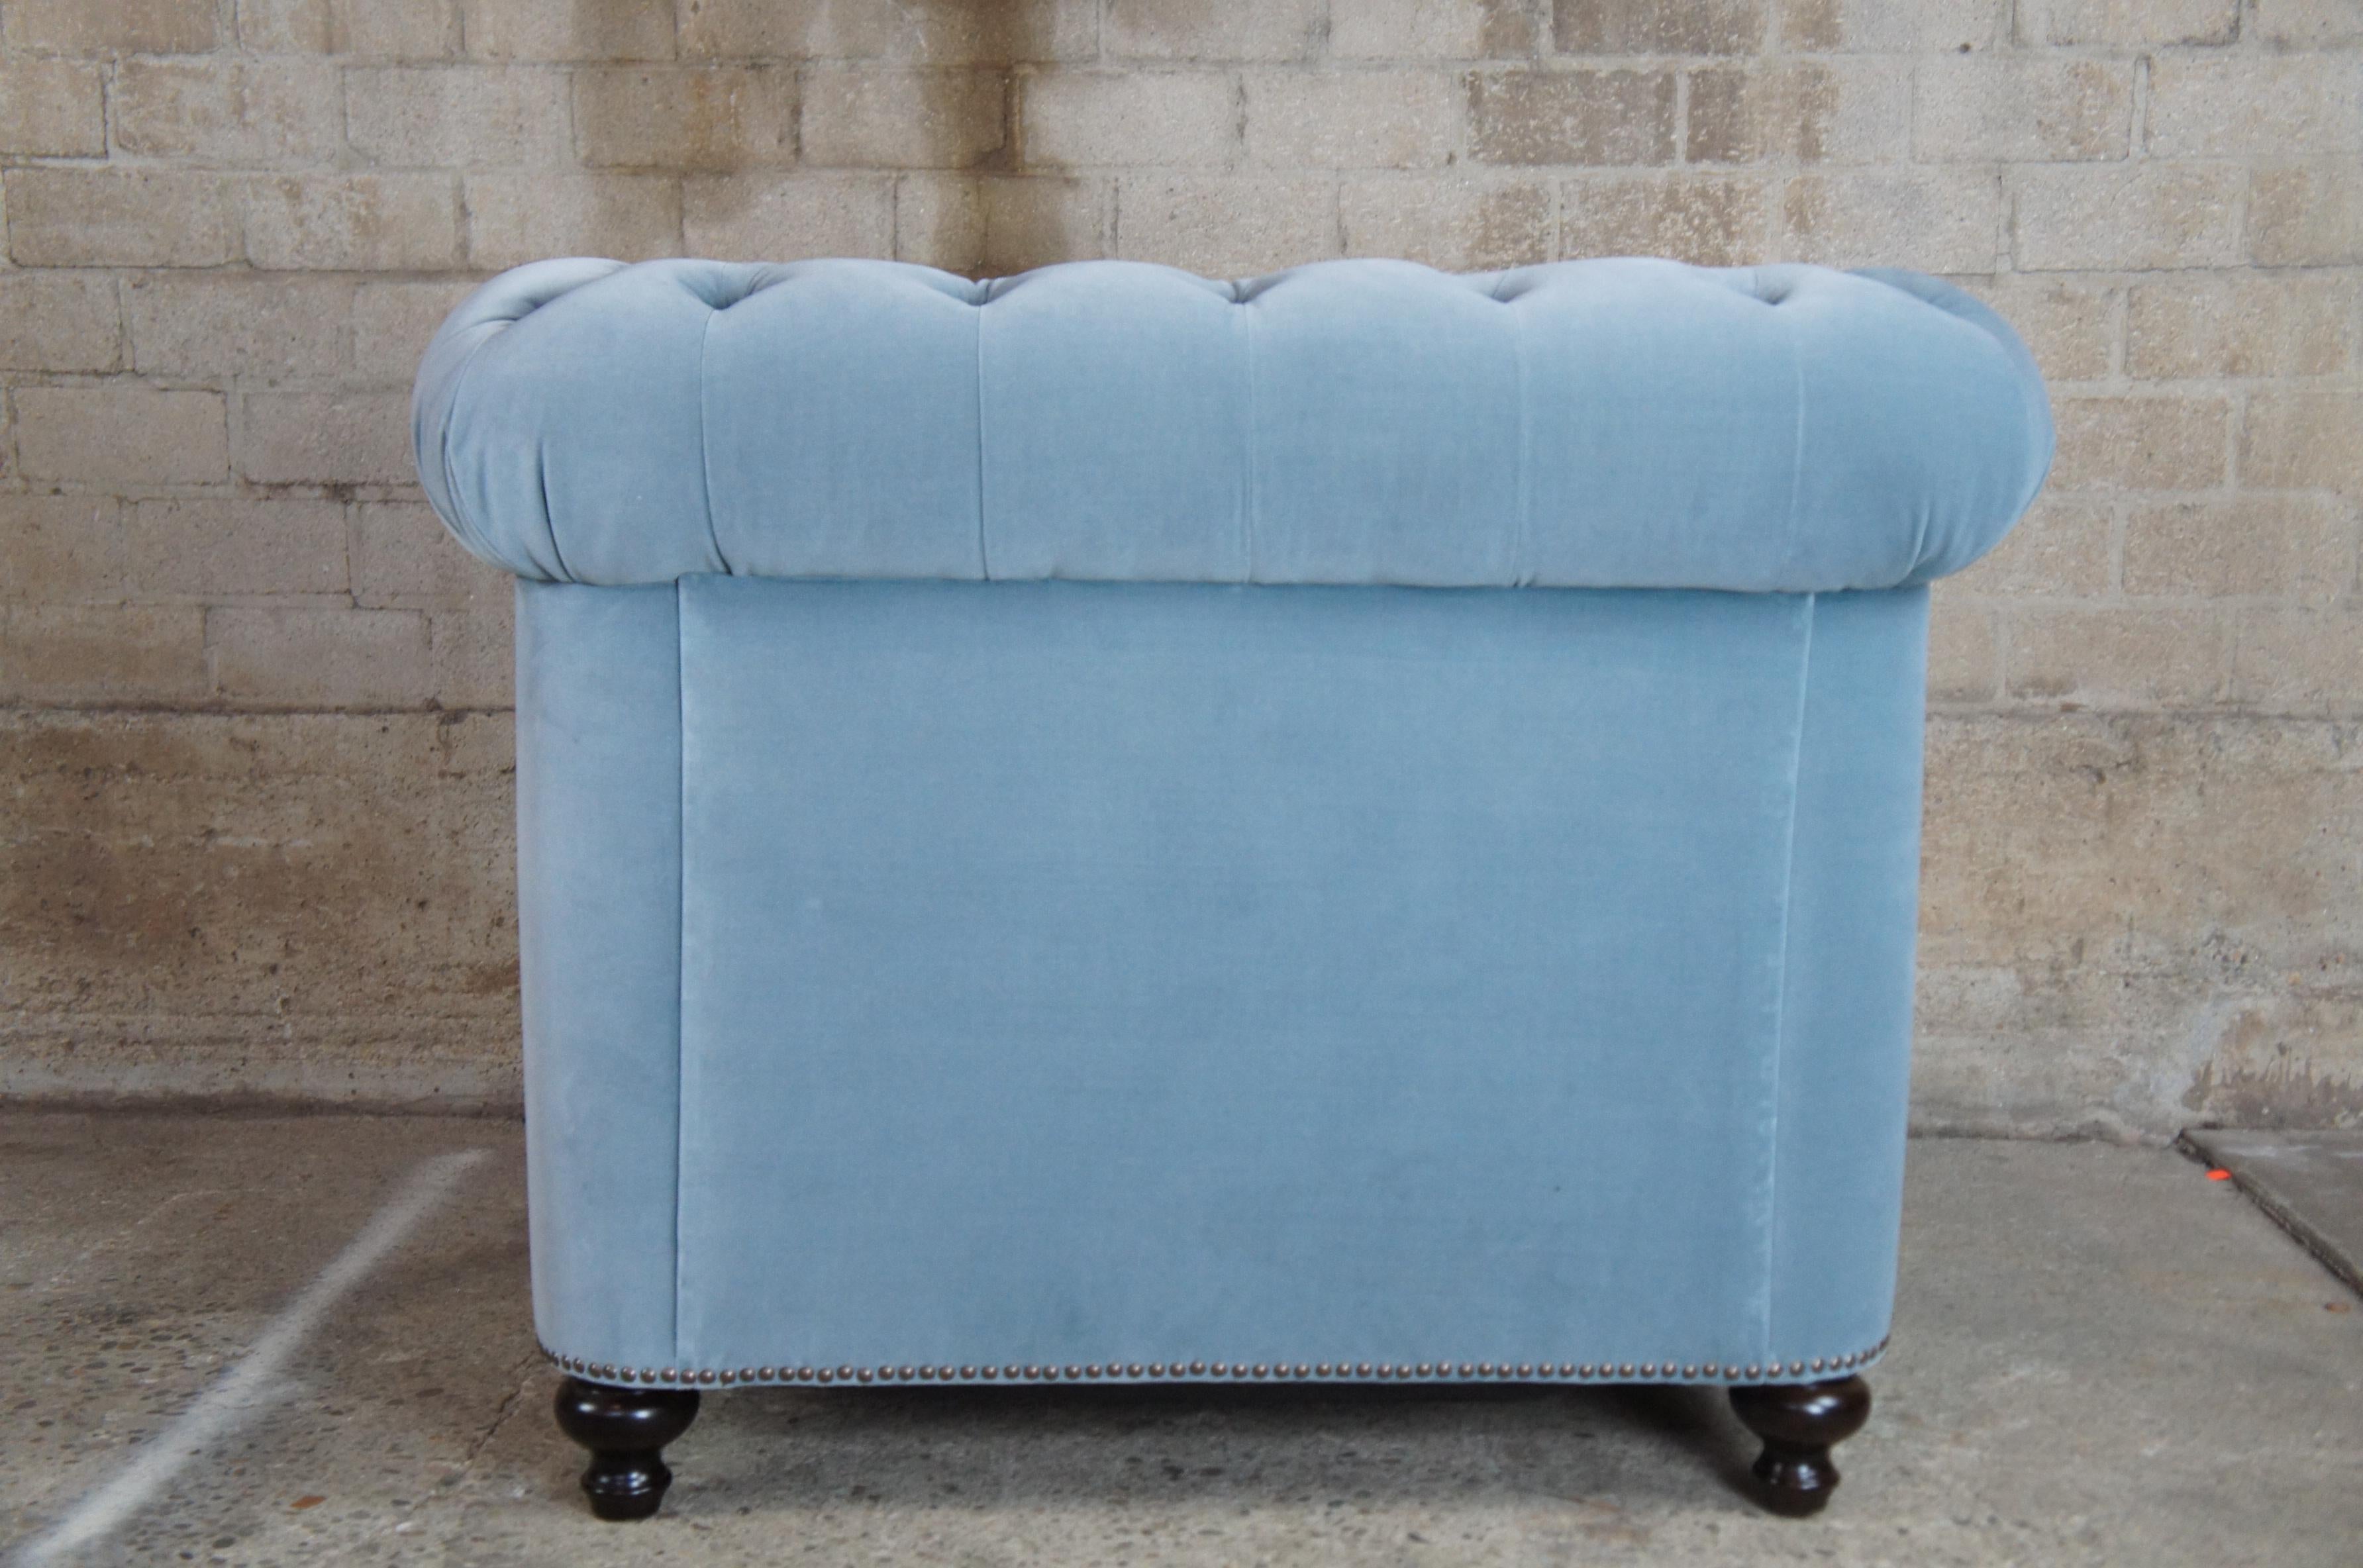 2 Frontgate Barrow Chesterfield Tufted Club Library Chairs Blue Nailhead Modern 1